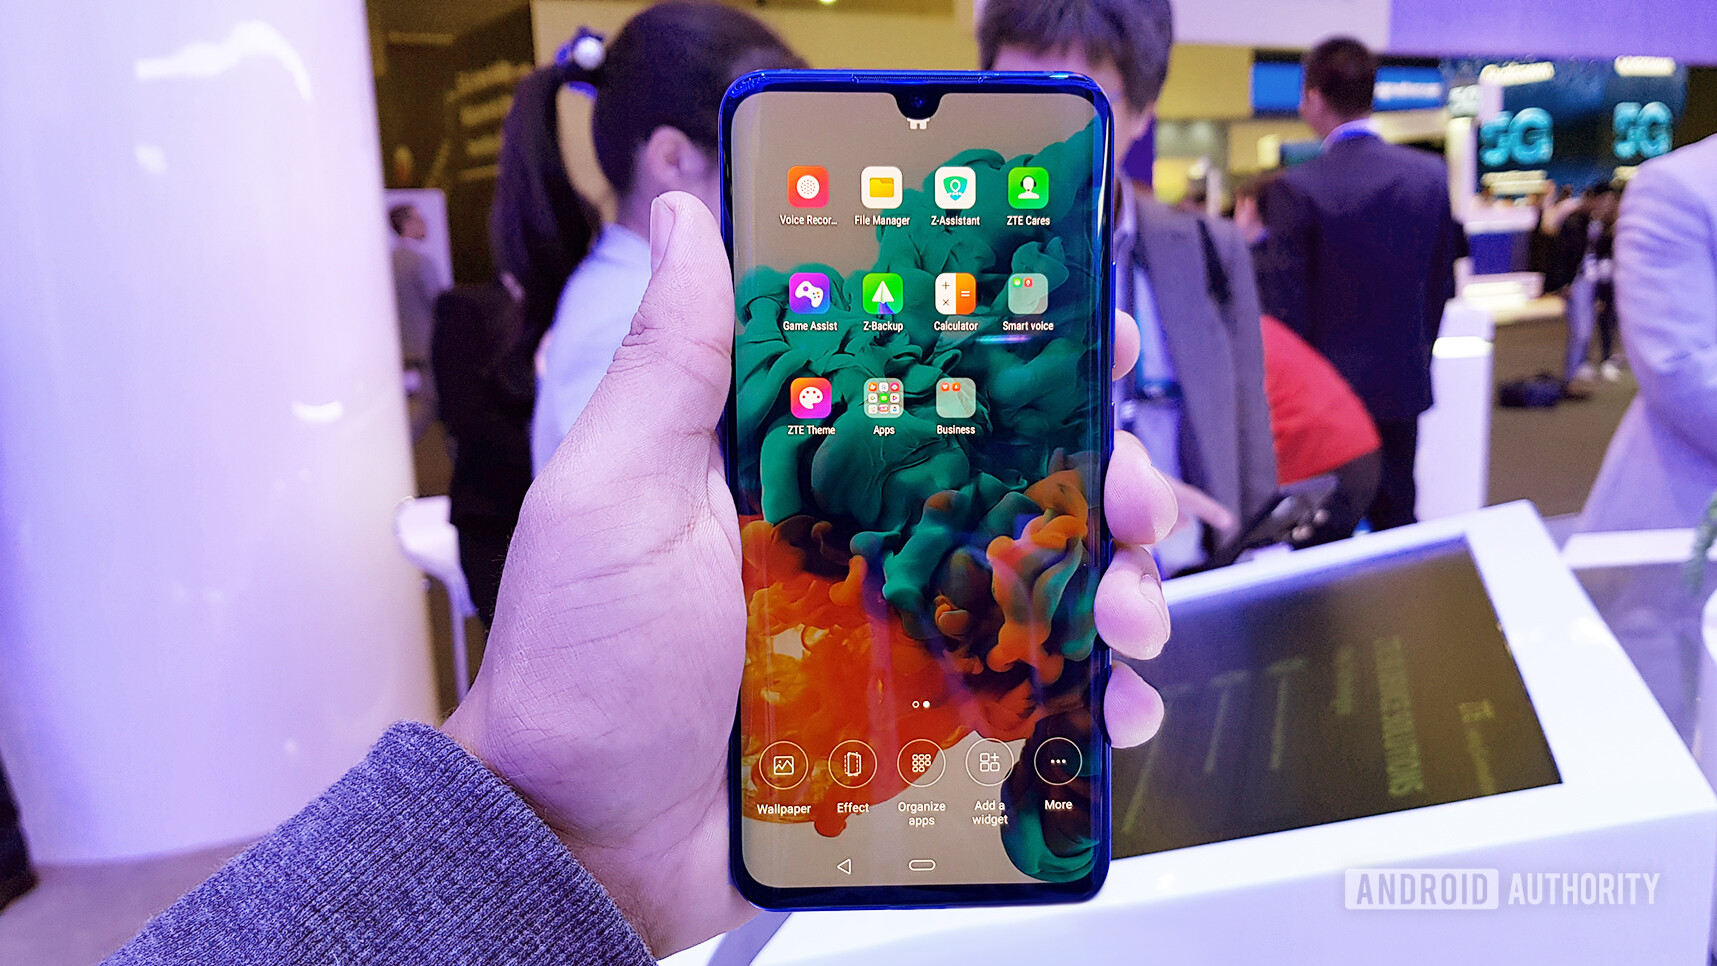 ZTE Axon 10 Pro 5G phone at the MWC 2019